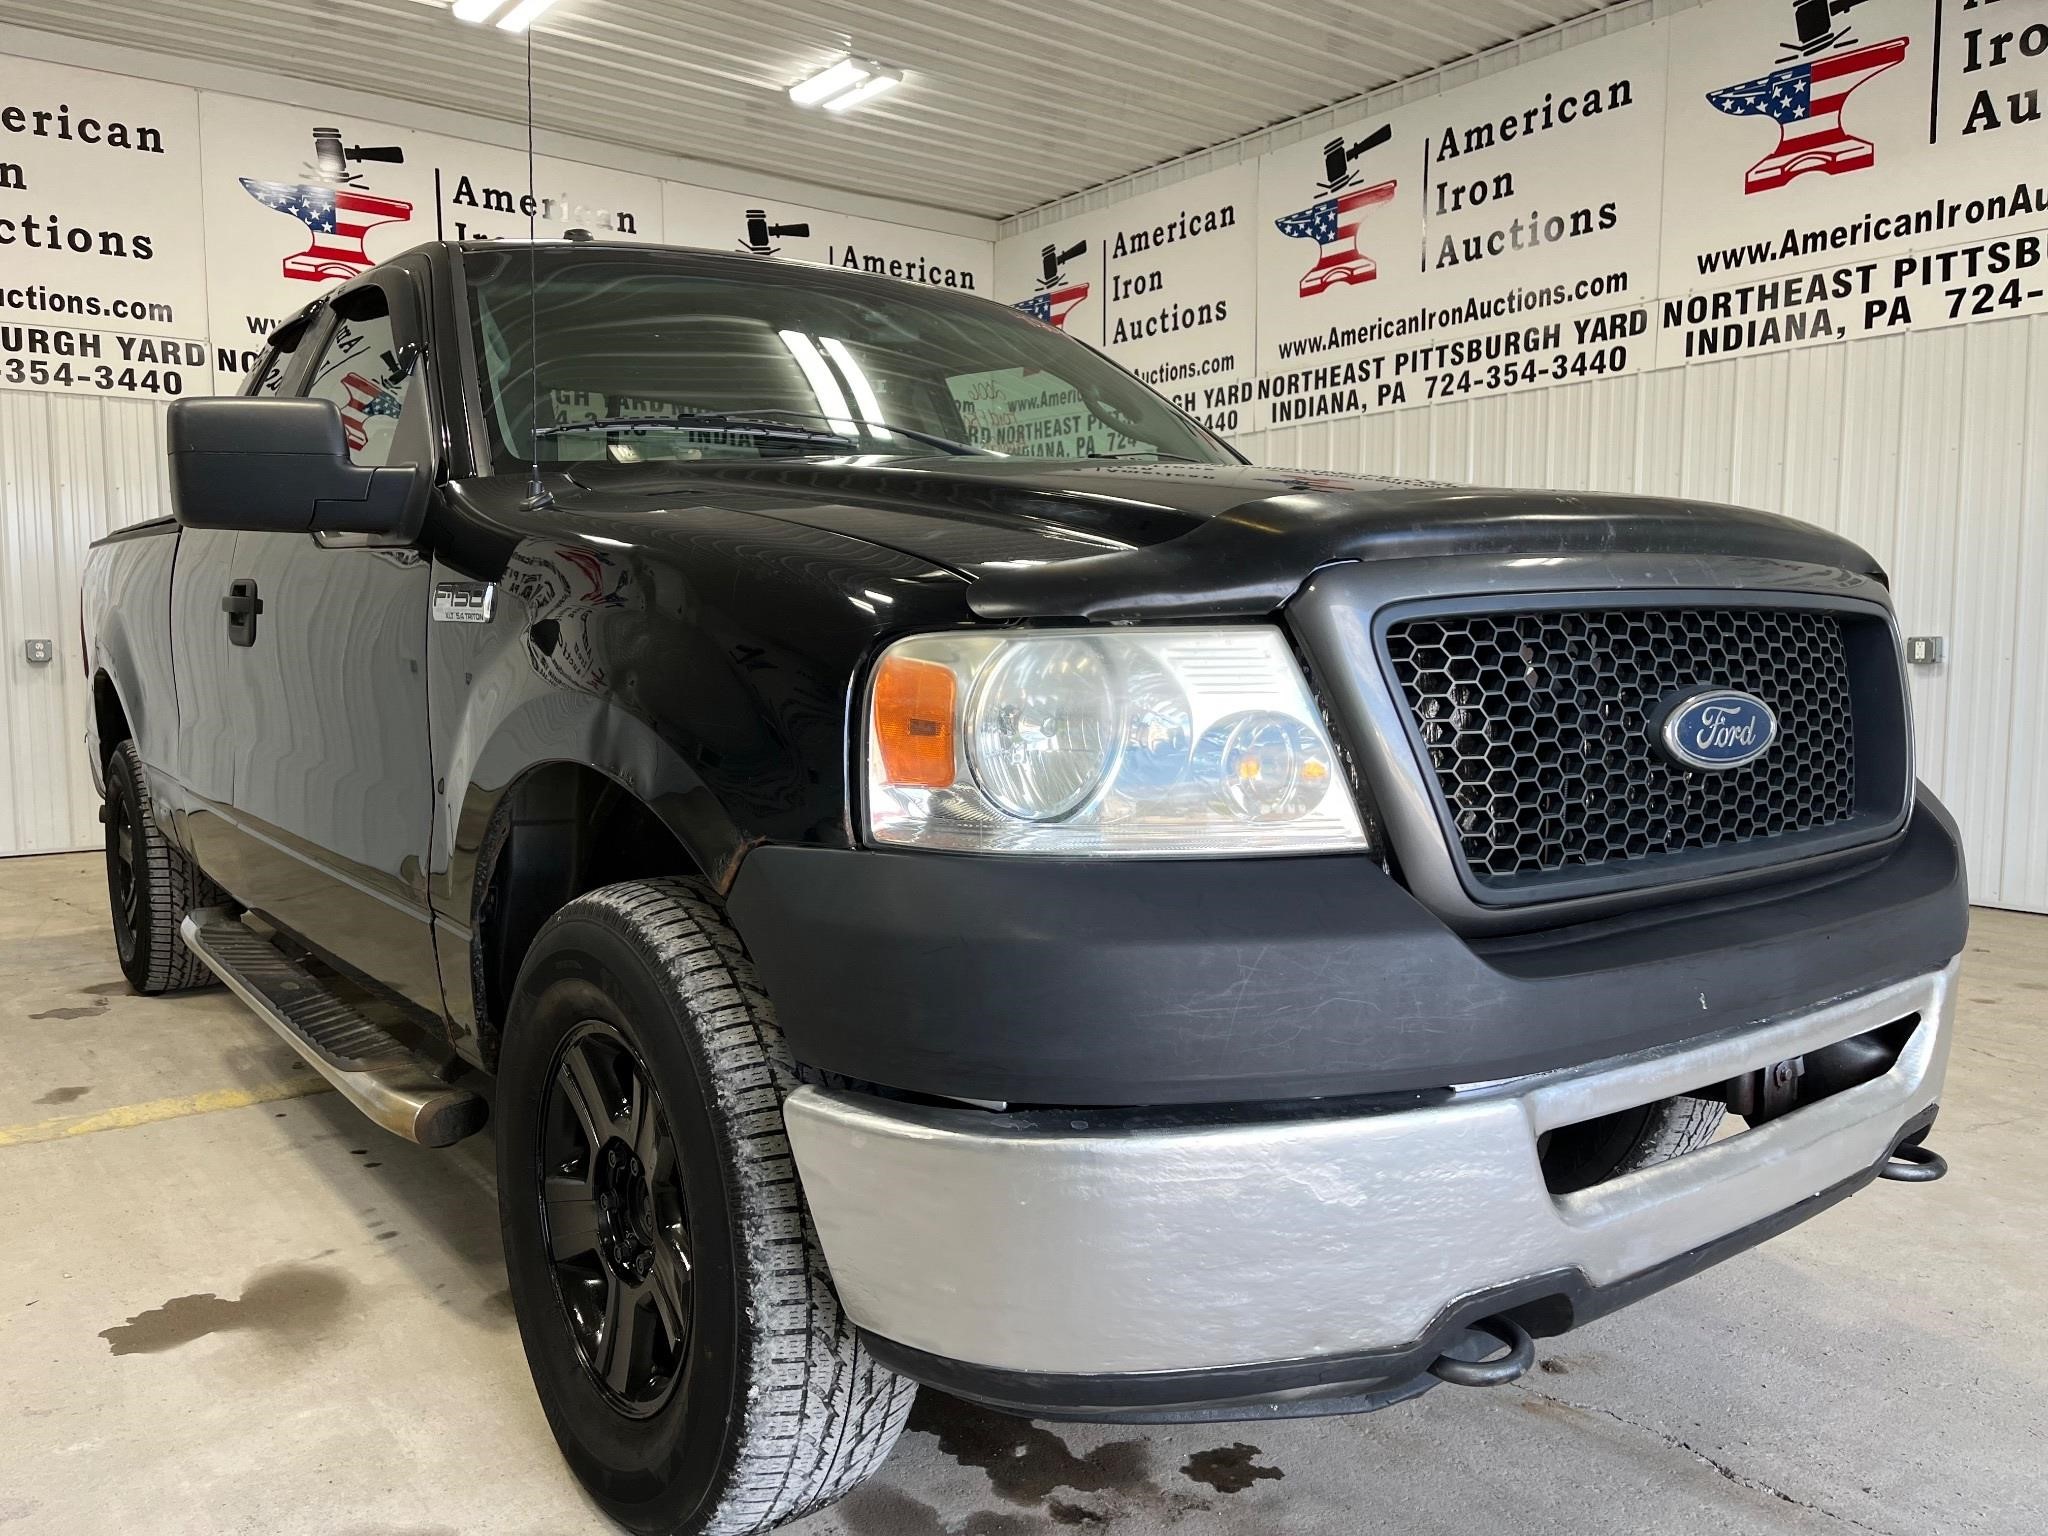 2006 Ford F150 Truck-Titled